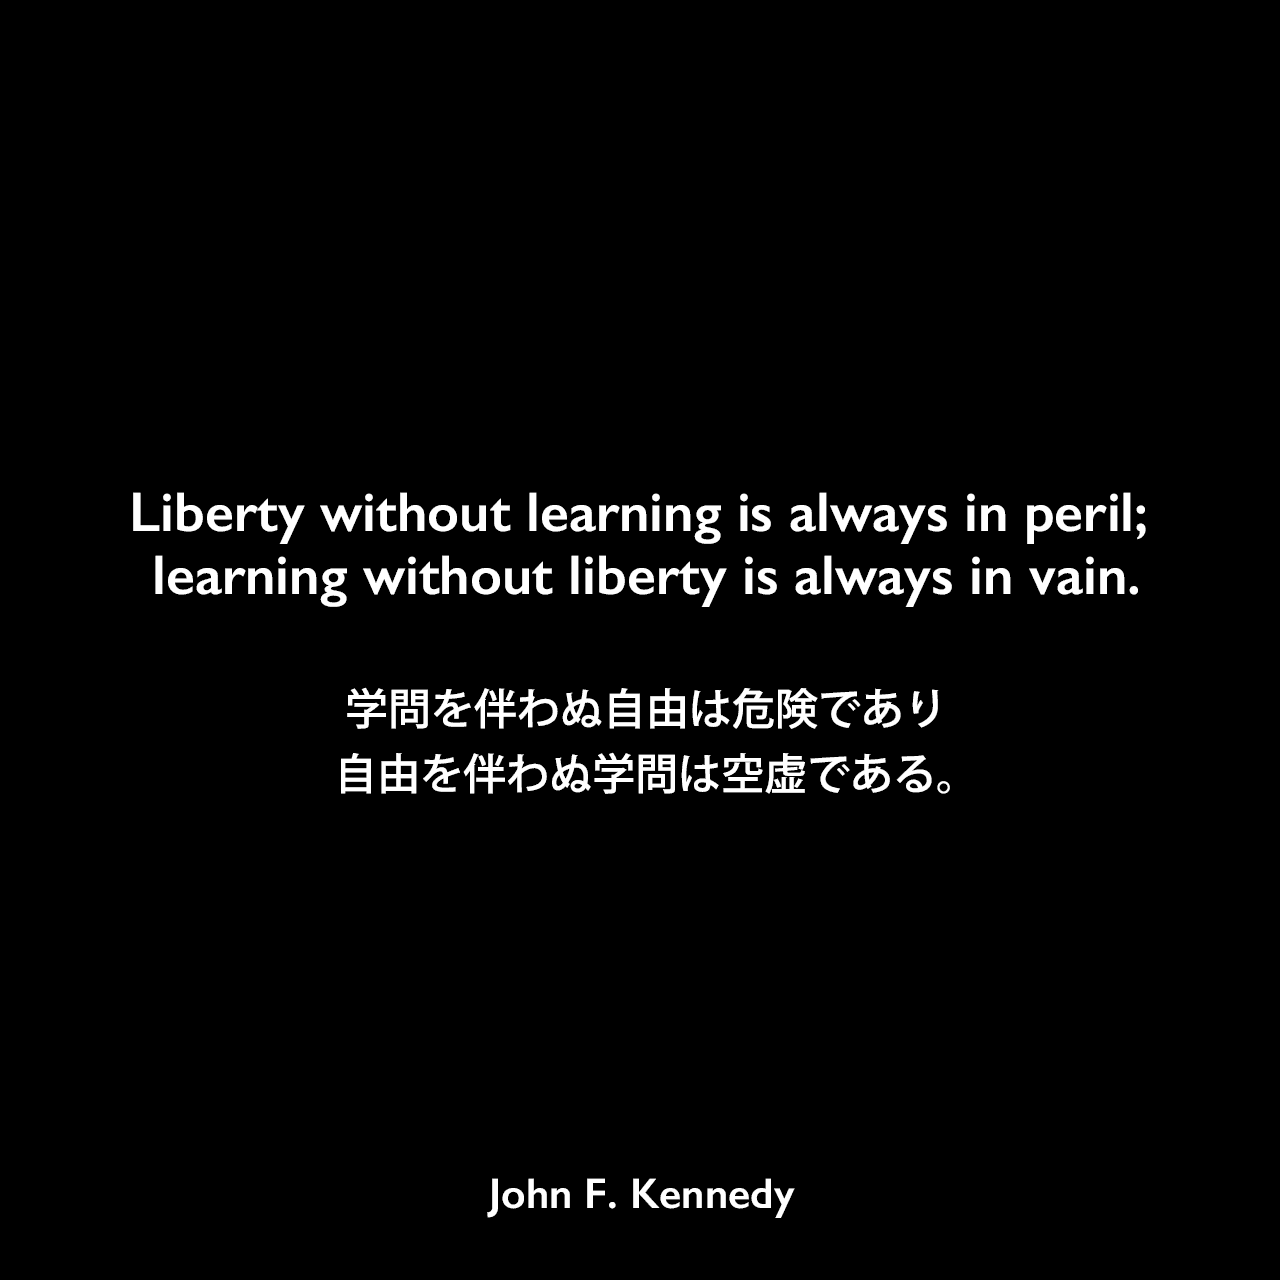 Liberty without learning is always in peril; learning without liberty is always in vain.学問を伴わぬ自由は危険であり、自由を伴わぬ学問は空虚である。- ヴァンダービルト大学での演説よりJohn F Kennedy